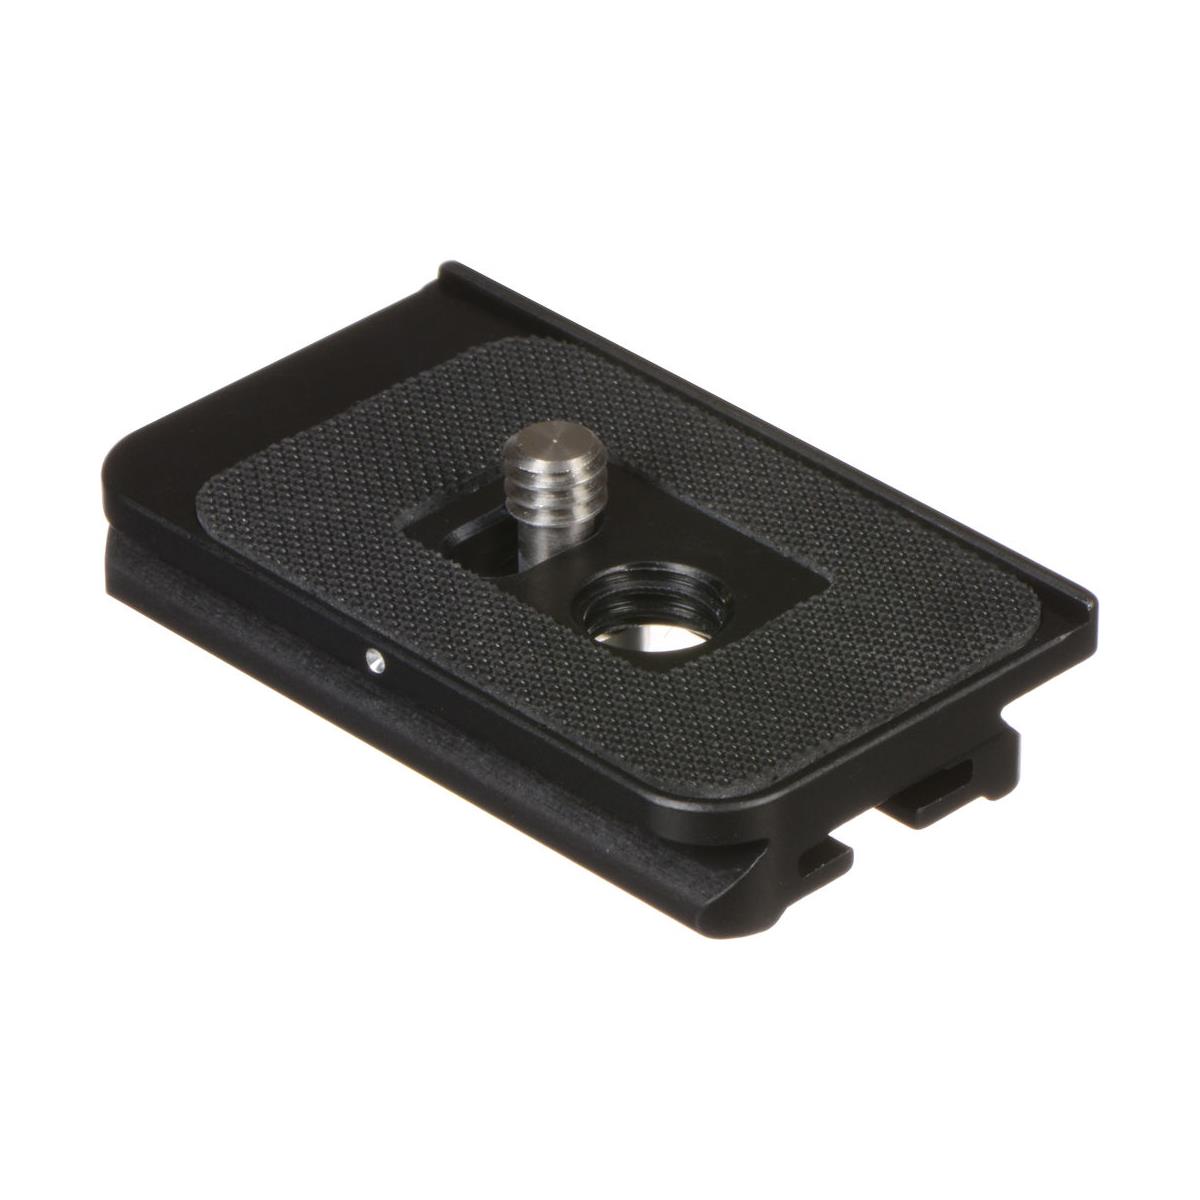 Image of Arca Swiss Slidefix Camera Plate for Hasselblad